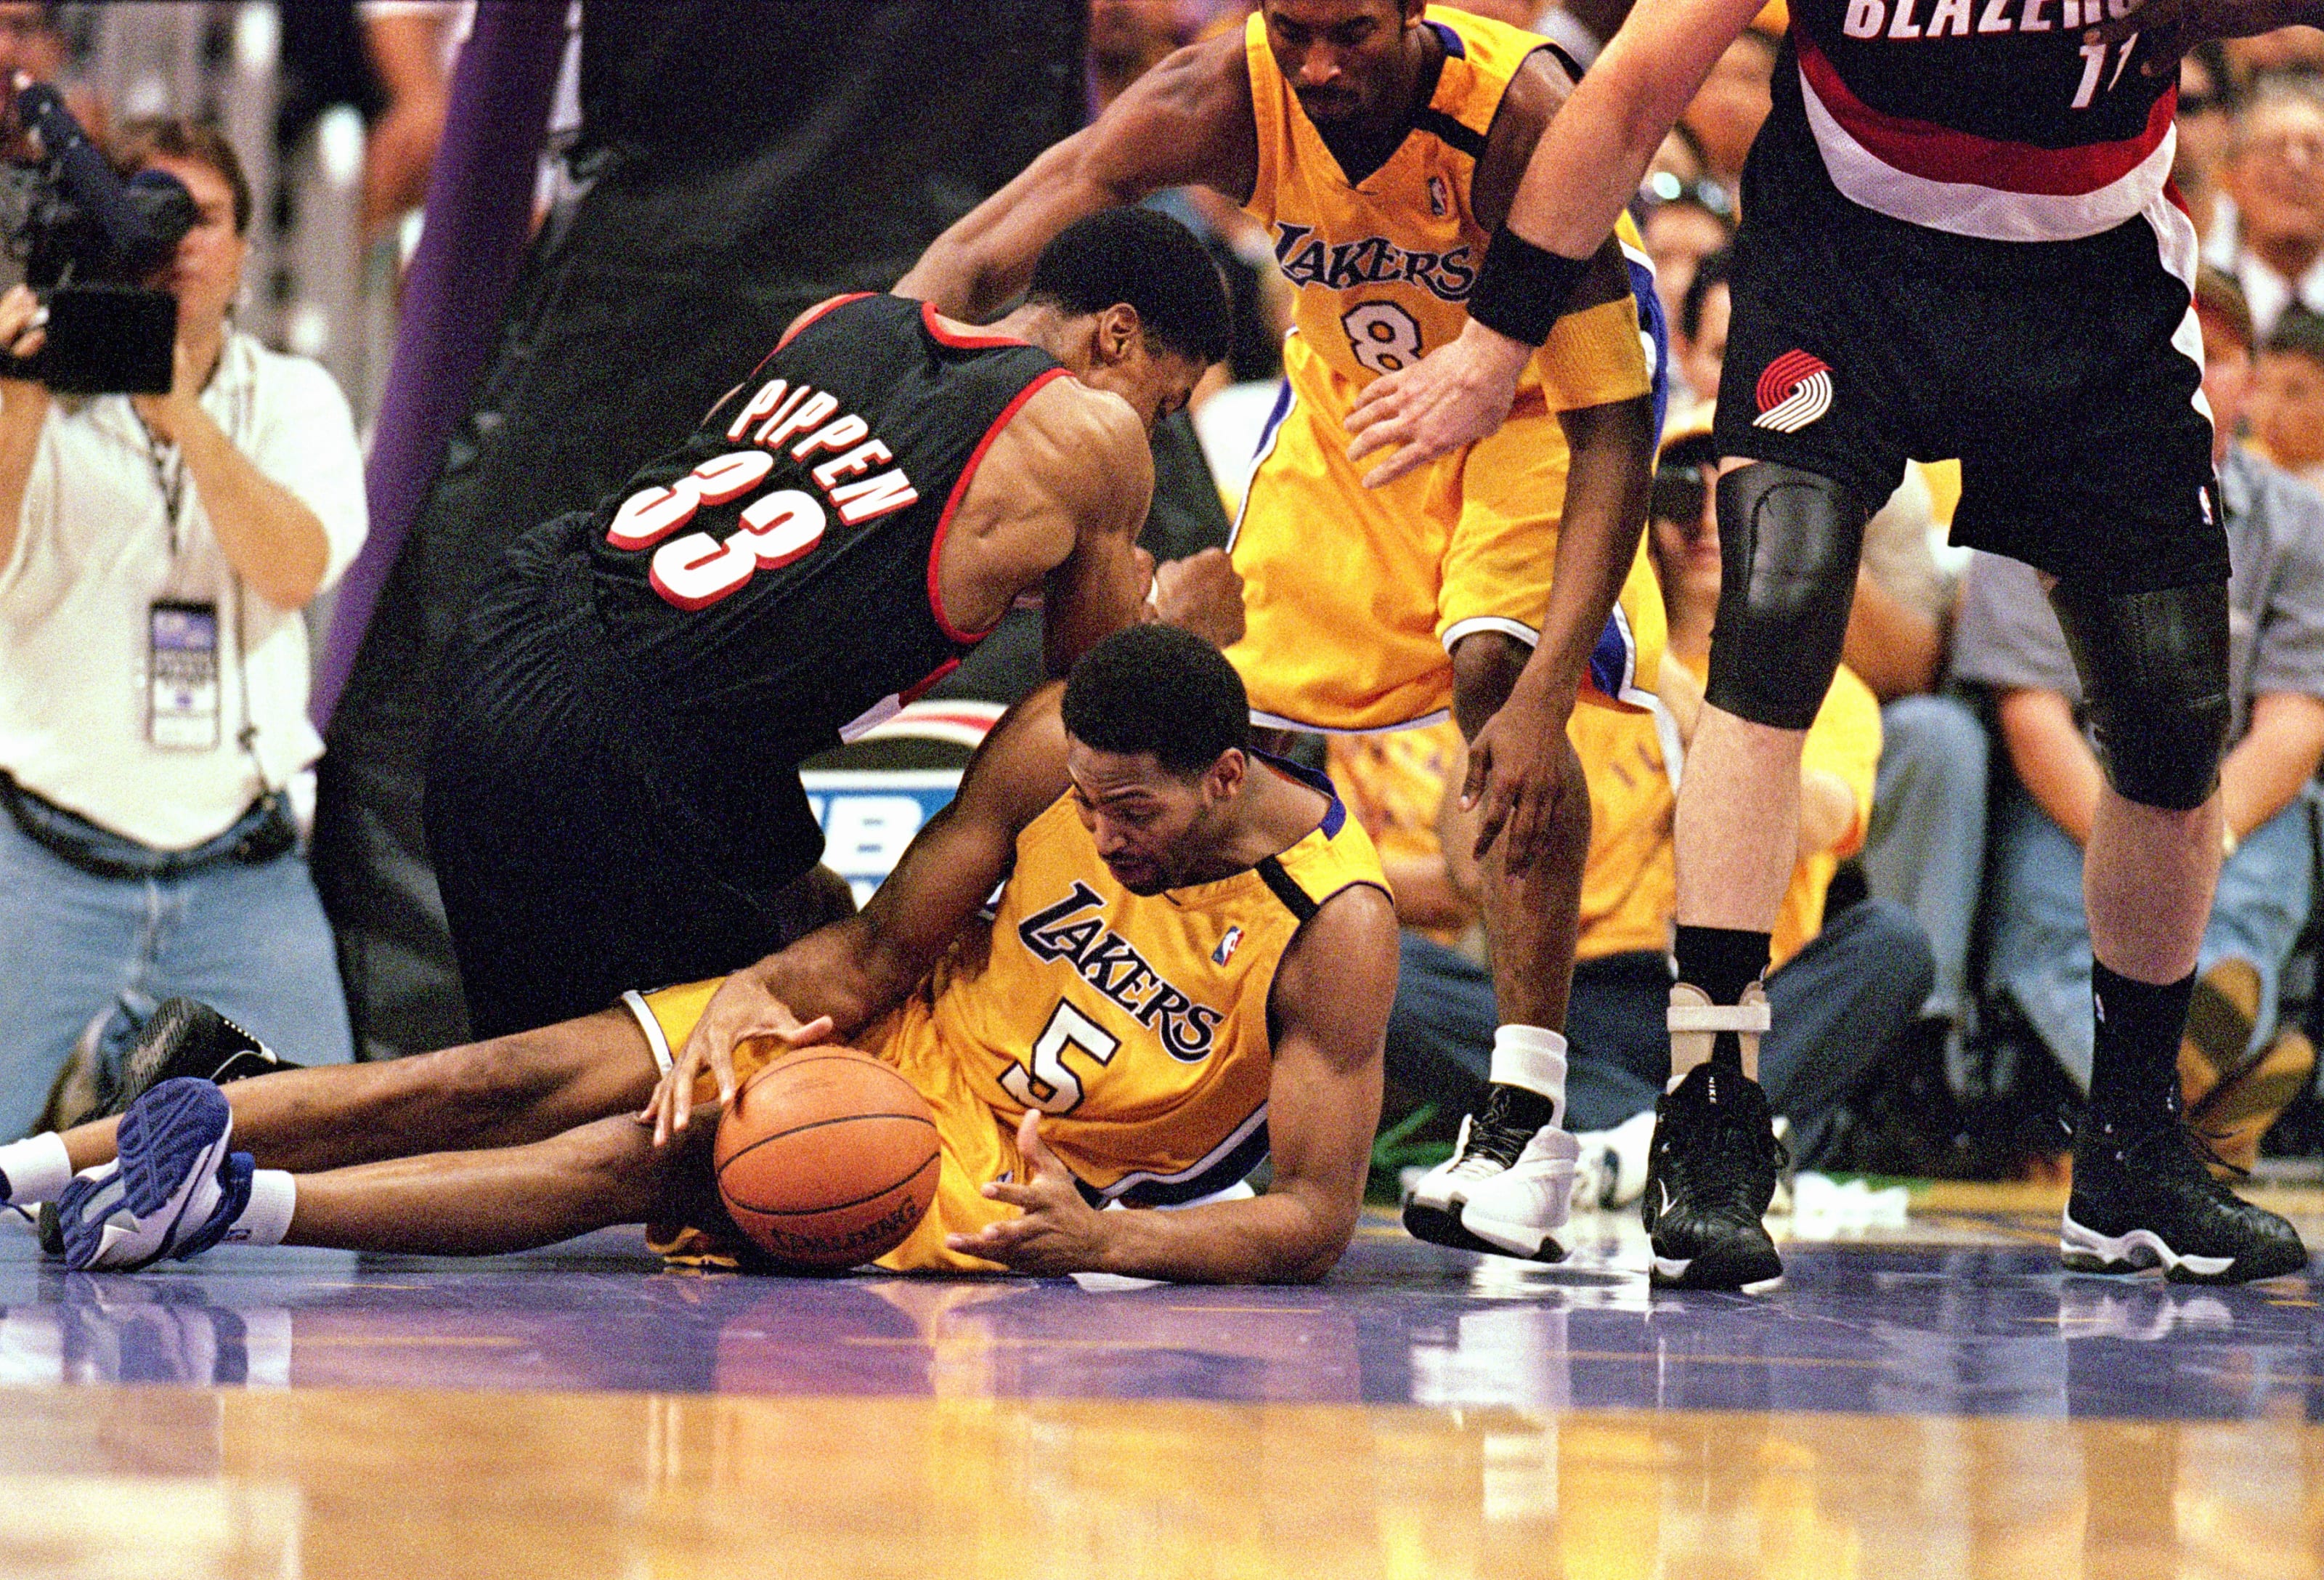 Smith reveals the Trail Blazers targeted Lakers' weakness in 2000